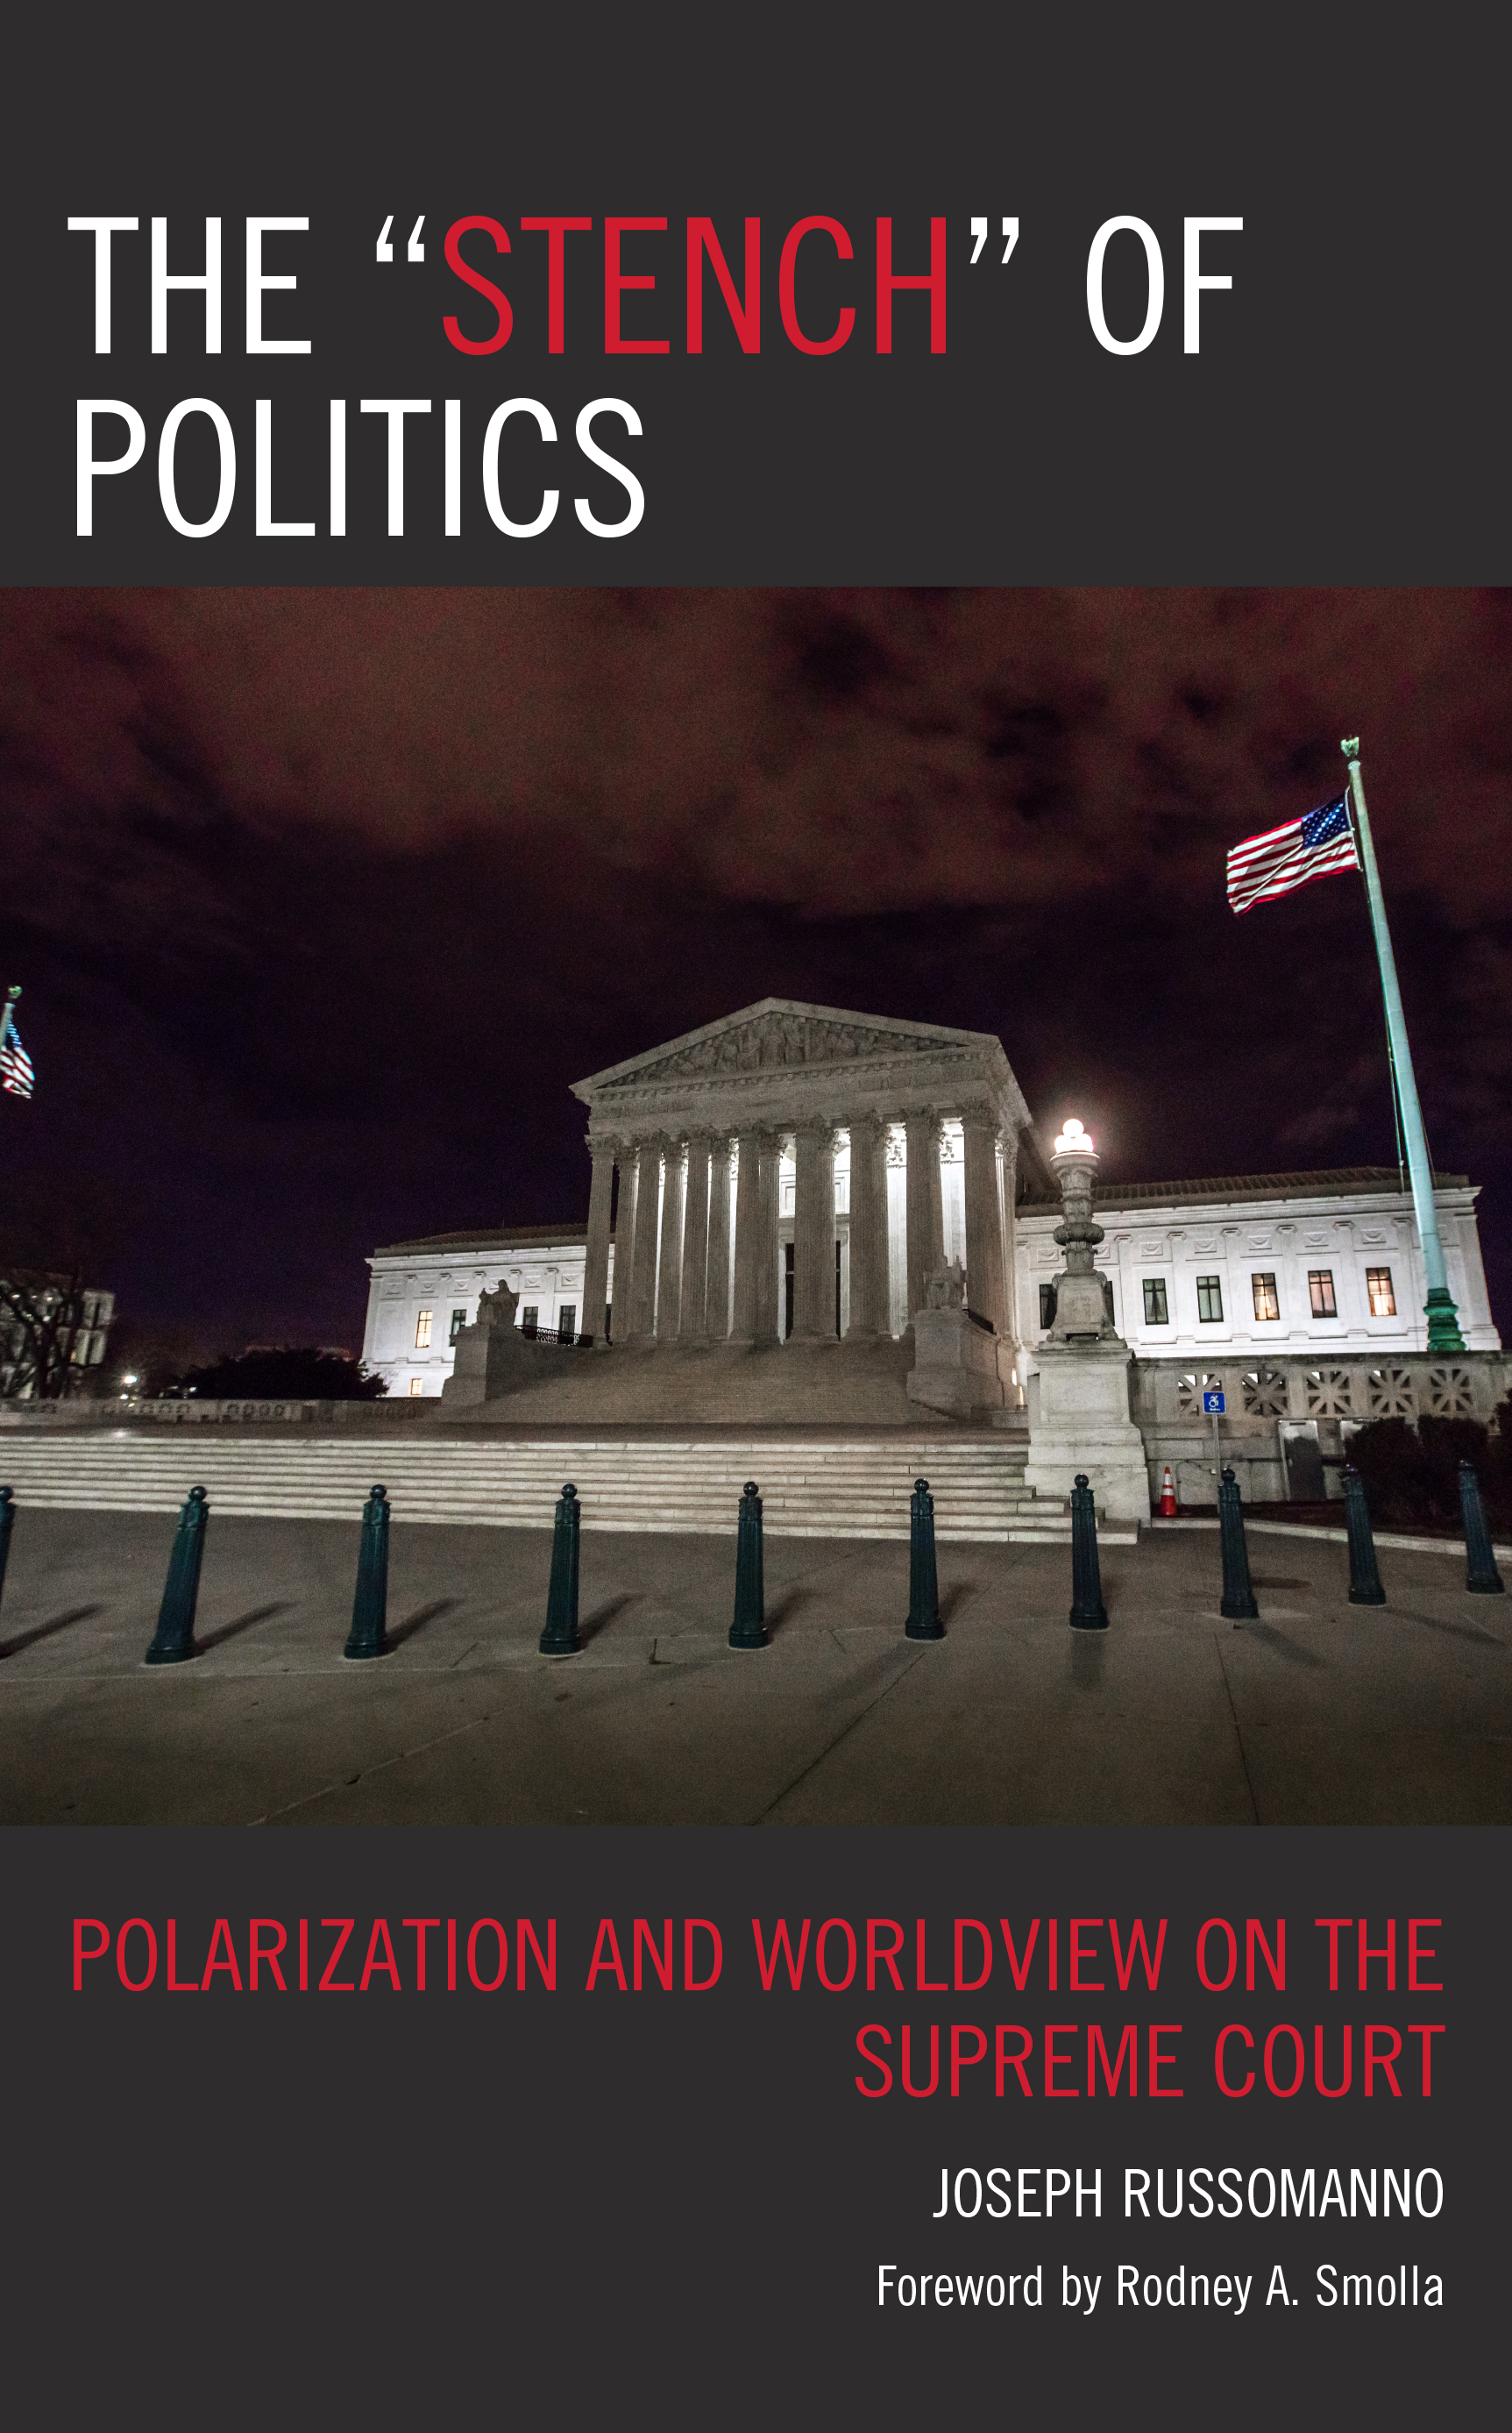 The “Stench” of Politics: Polarization and Worldview on the Supreme Court